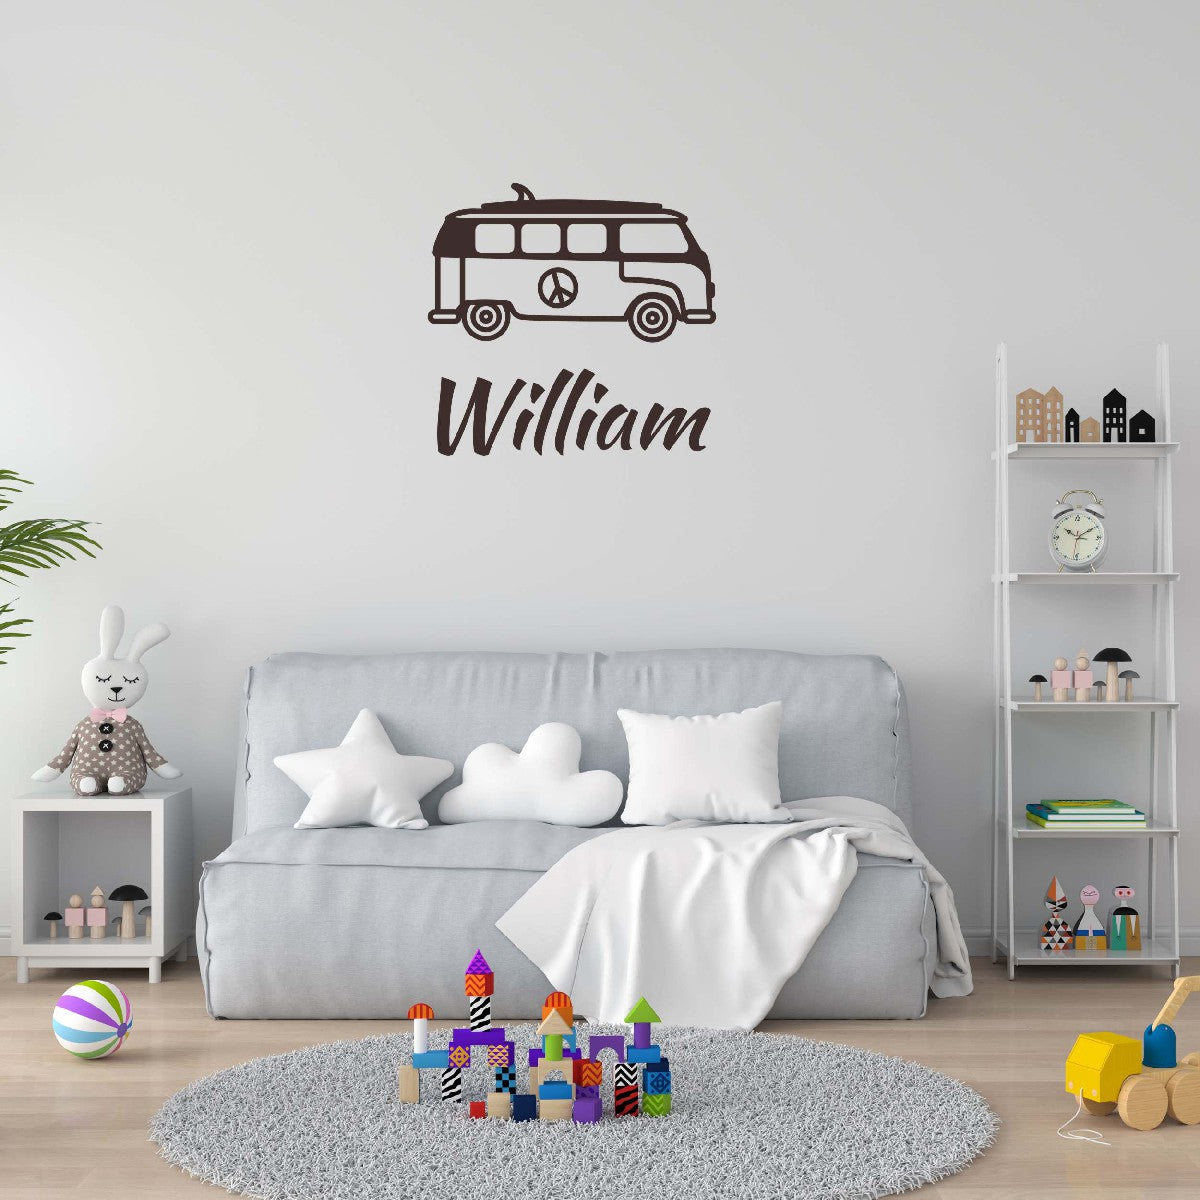 Personalized Name Stickers with Bus - Durable Custom Name Stickers for Furniture Laptops Doors - Easily-Applied Name Wall Decals for Kids Bedroom - Cool Name Decal